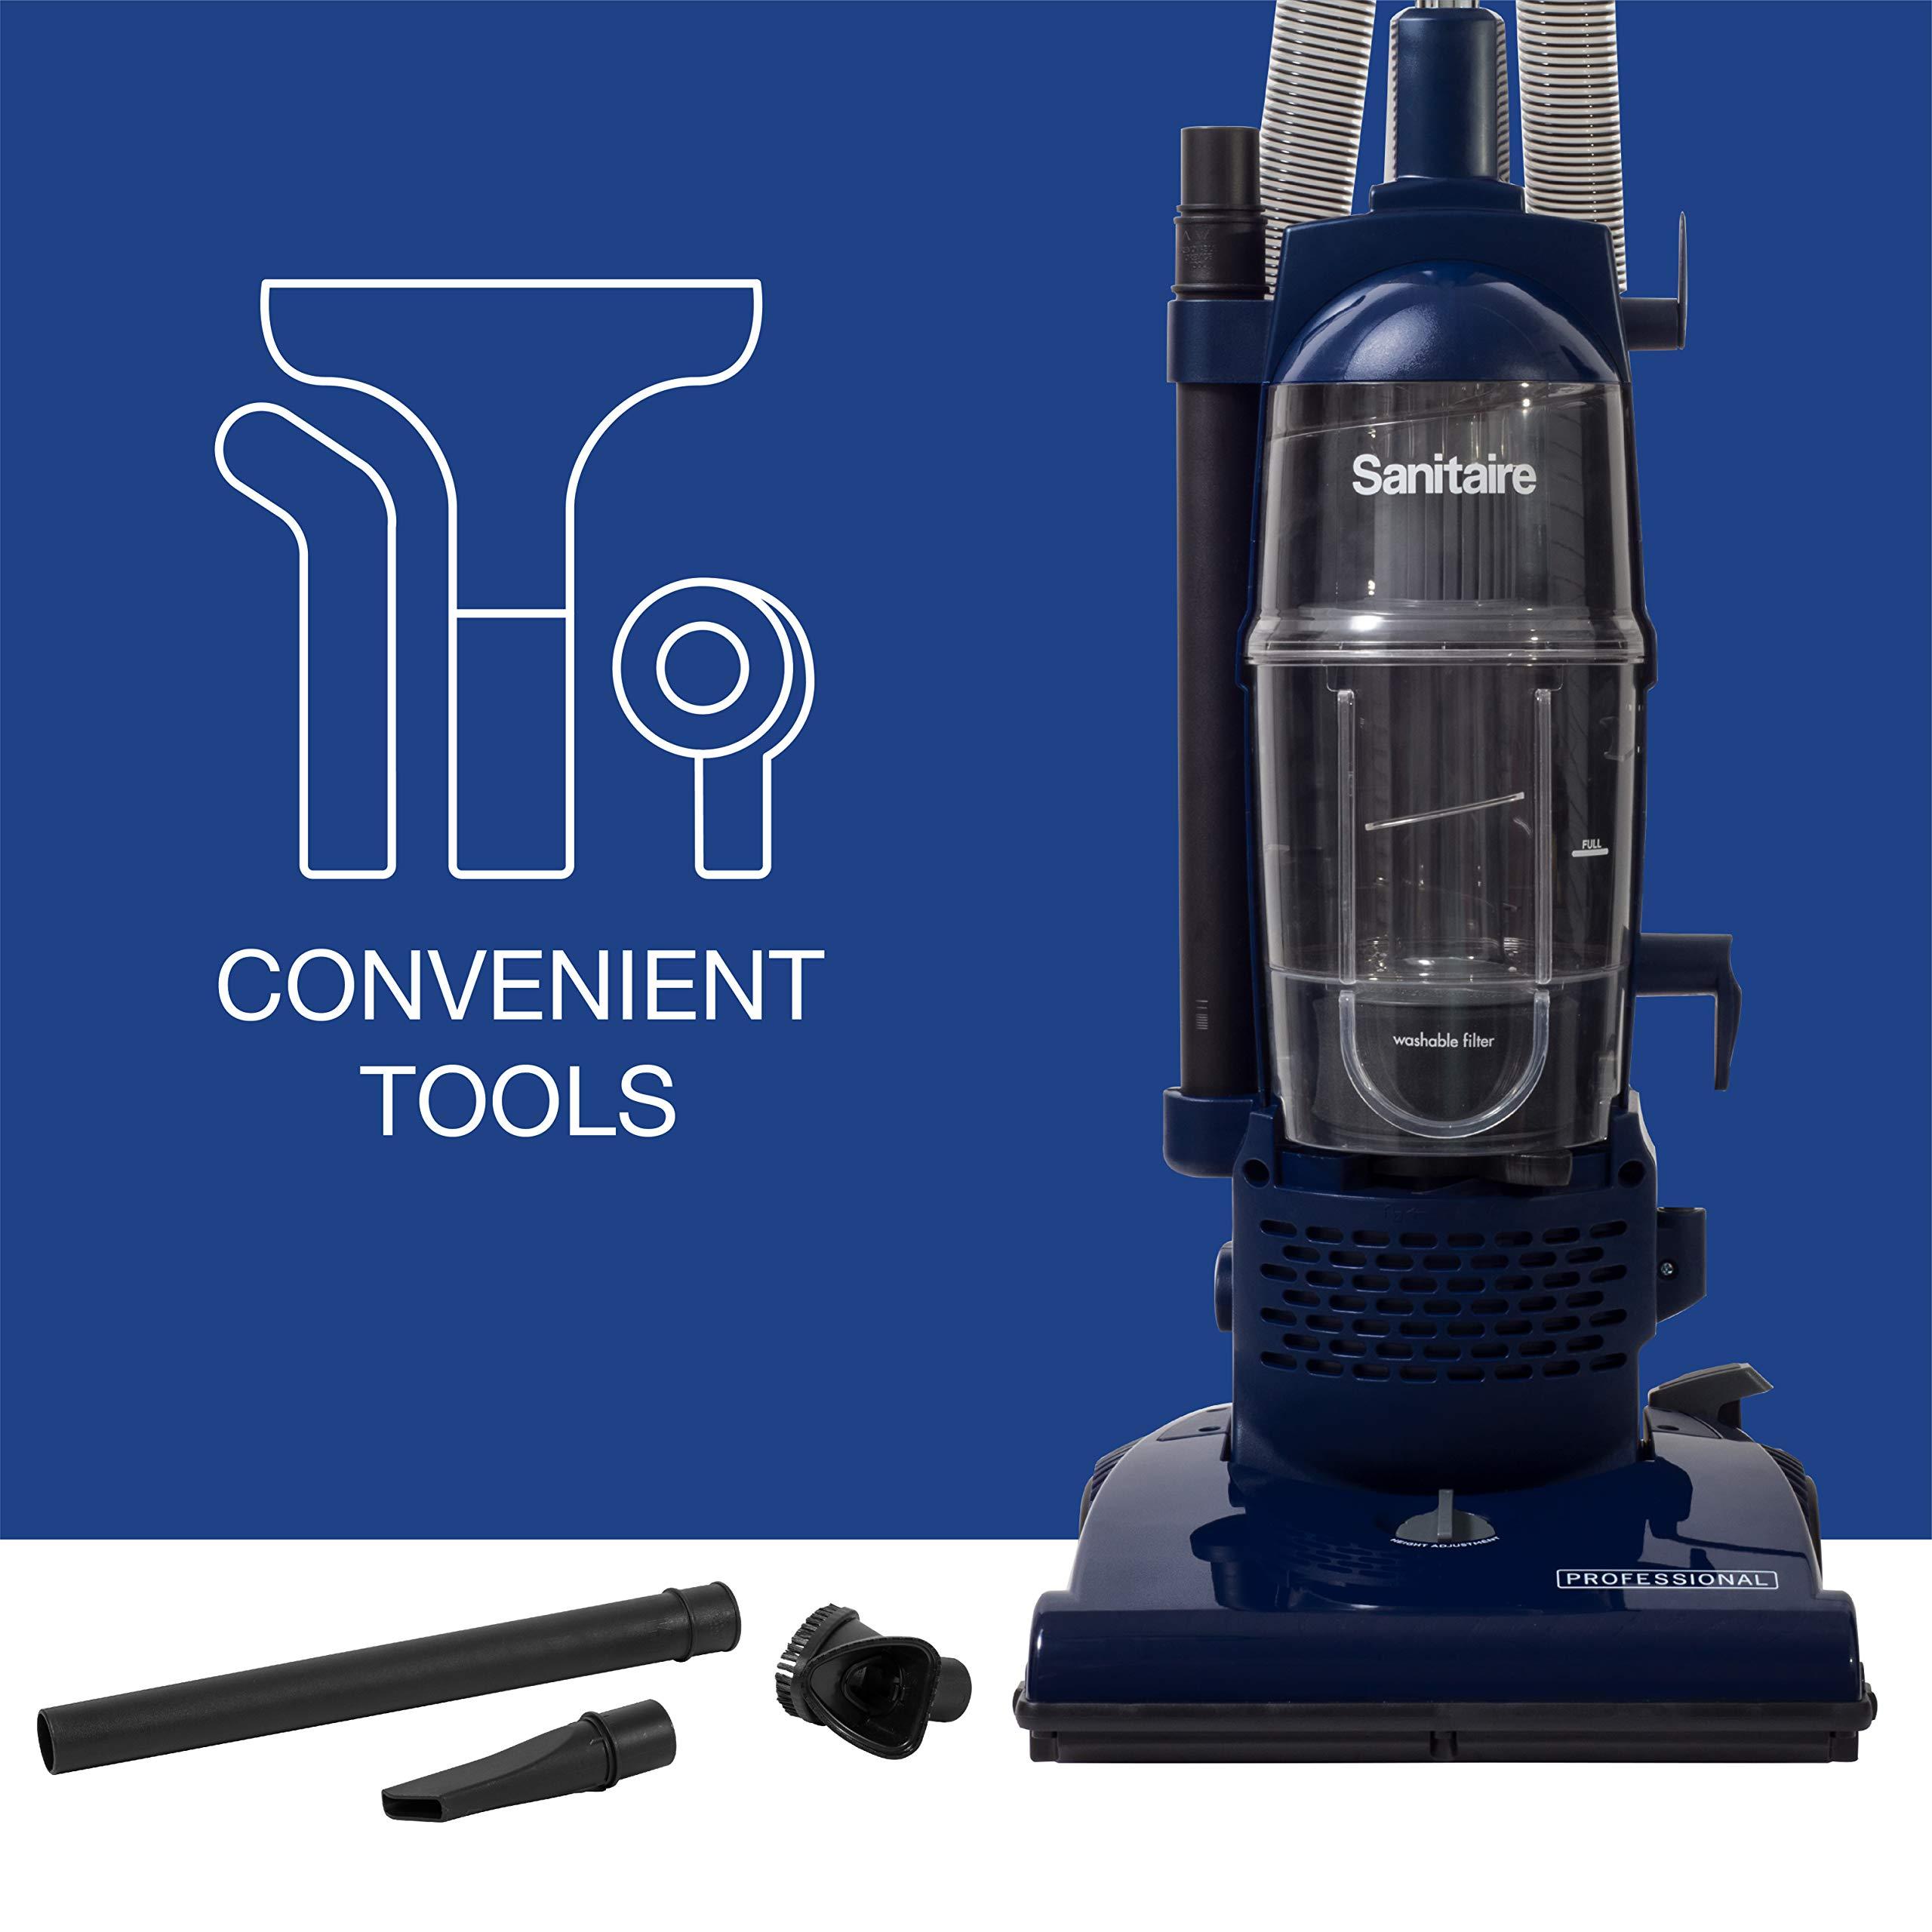 Sanitaire Professional Bagless Upright Commercial Vacuum with Tools, SL4410A - image 5 of 6